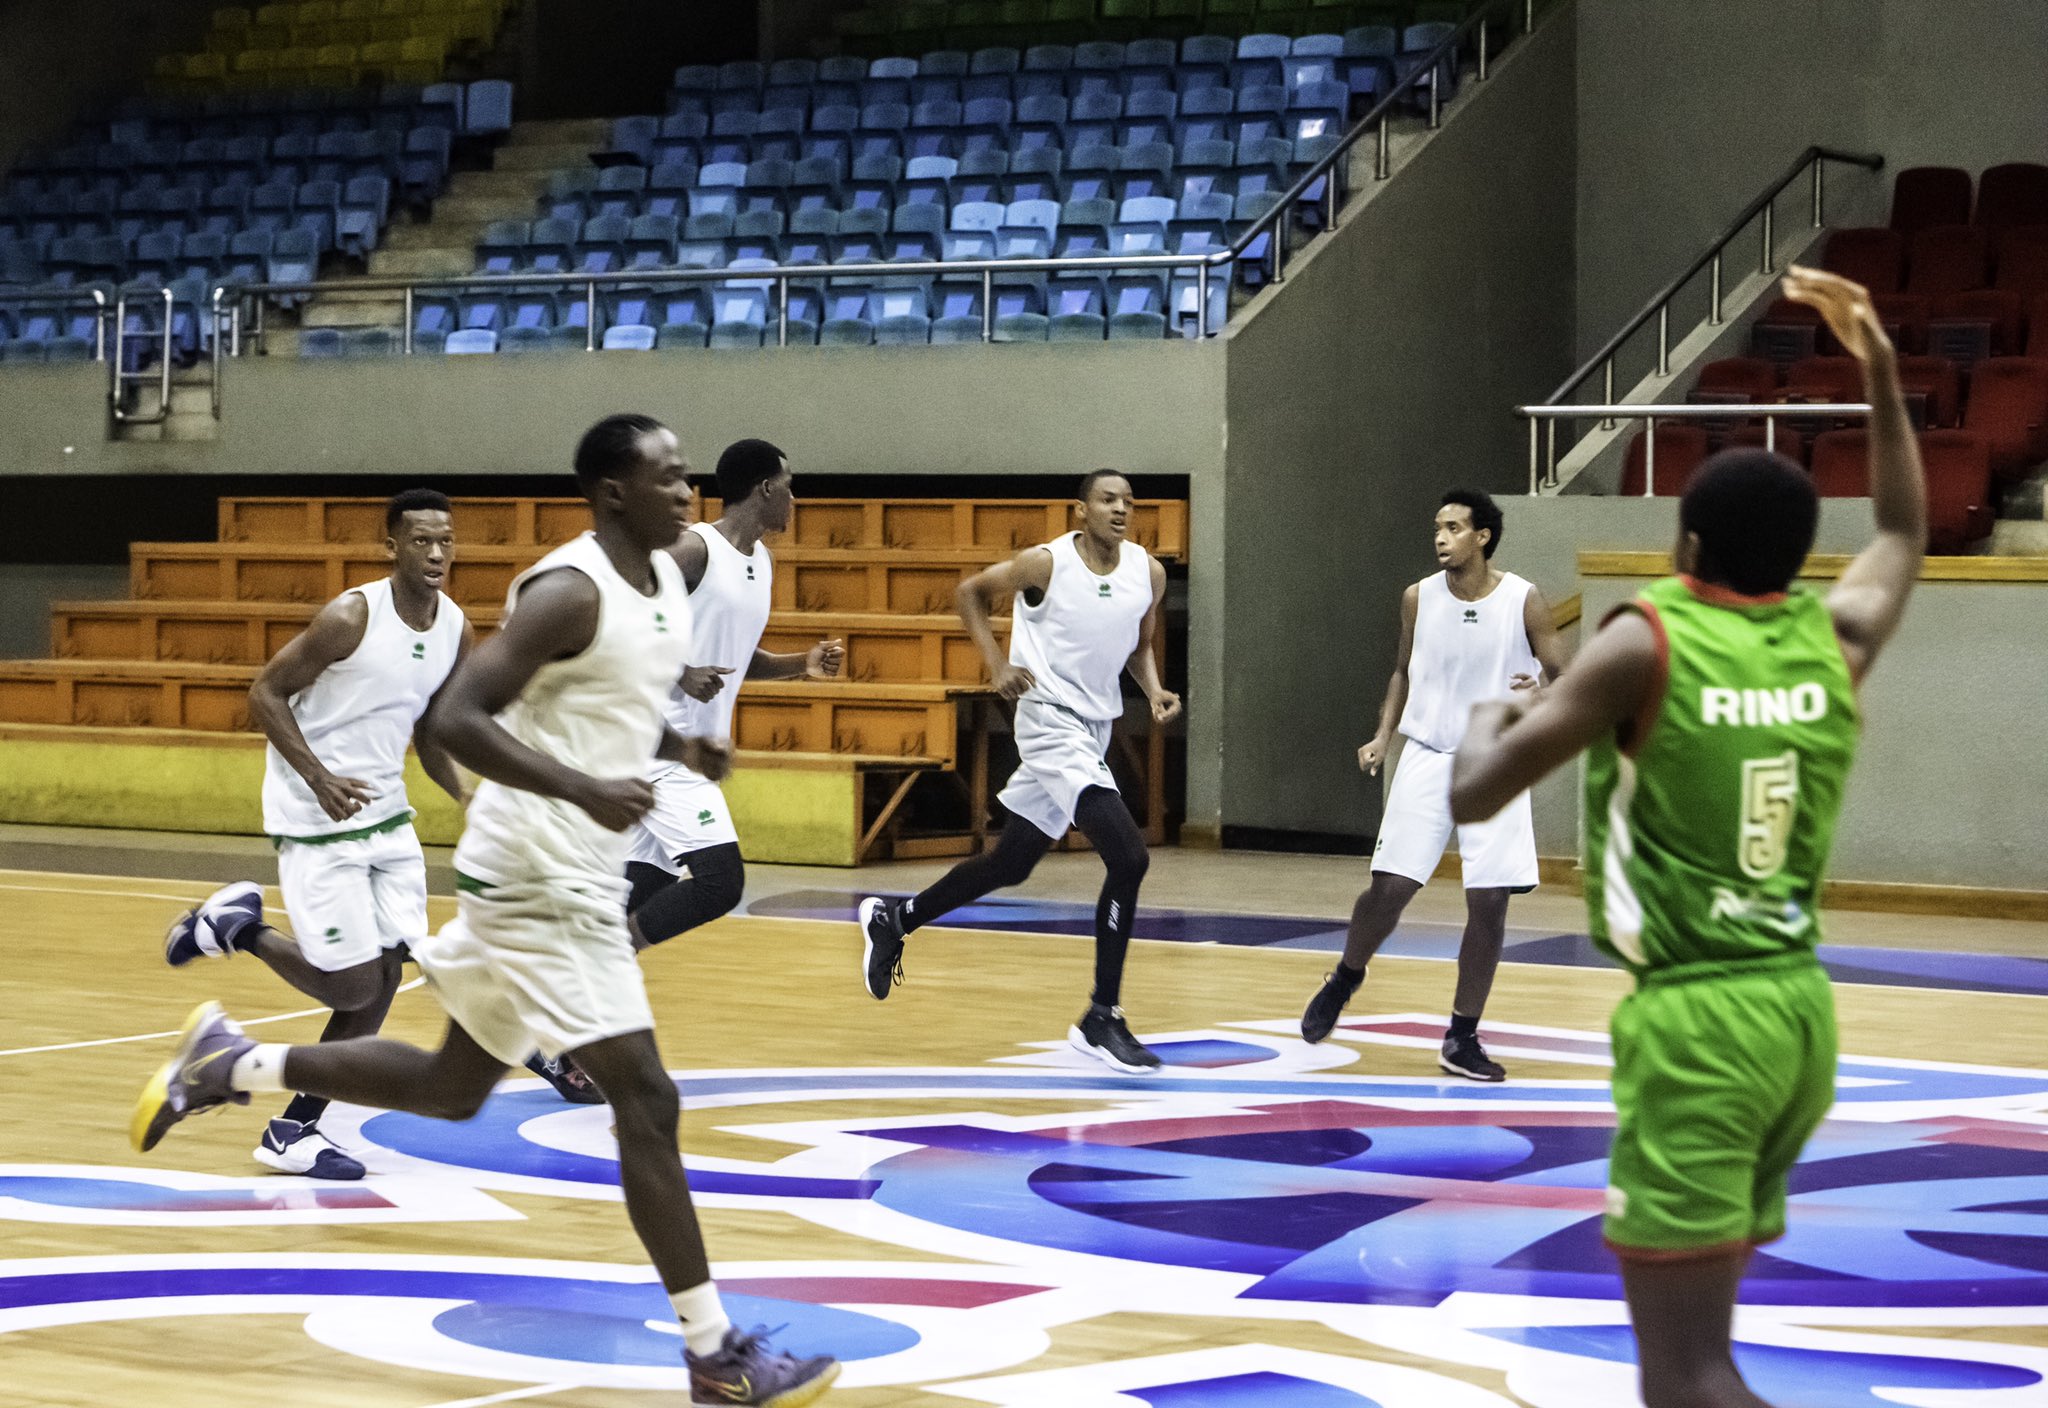 The Under-18 national basketball team during a friendly game against Madagascar. The team will face Mali in its first game at the FIBA Africa U-18 Championship in Antananarivo, Madagascar.